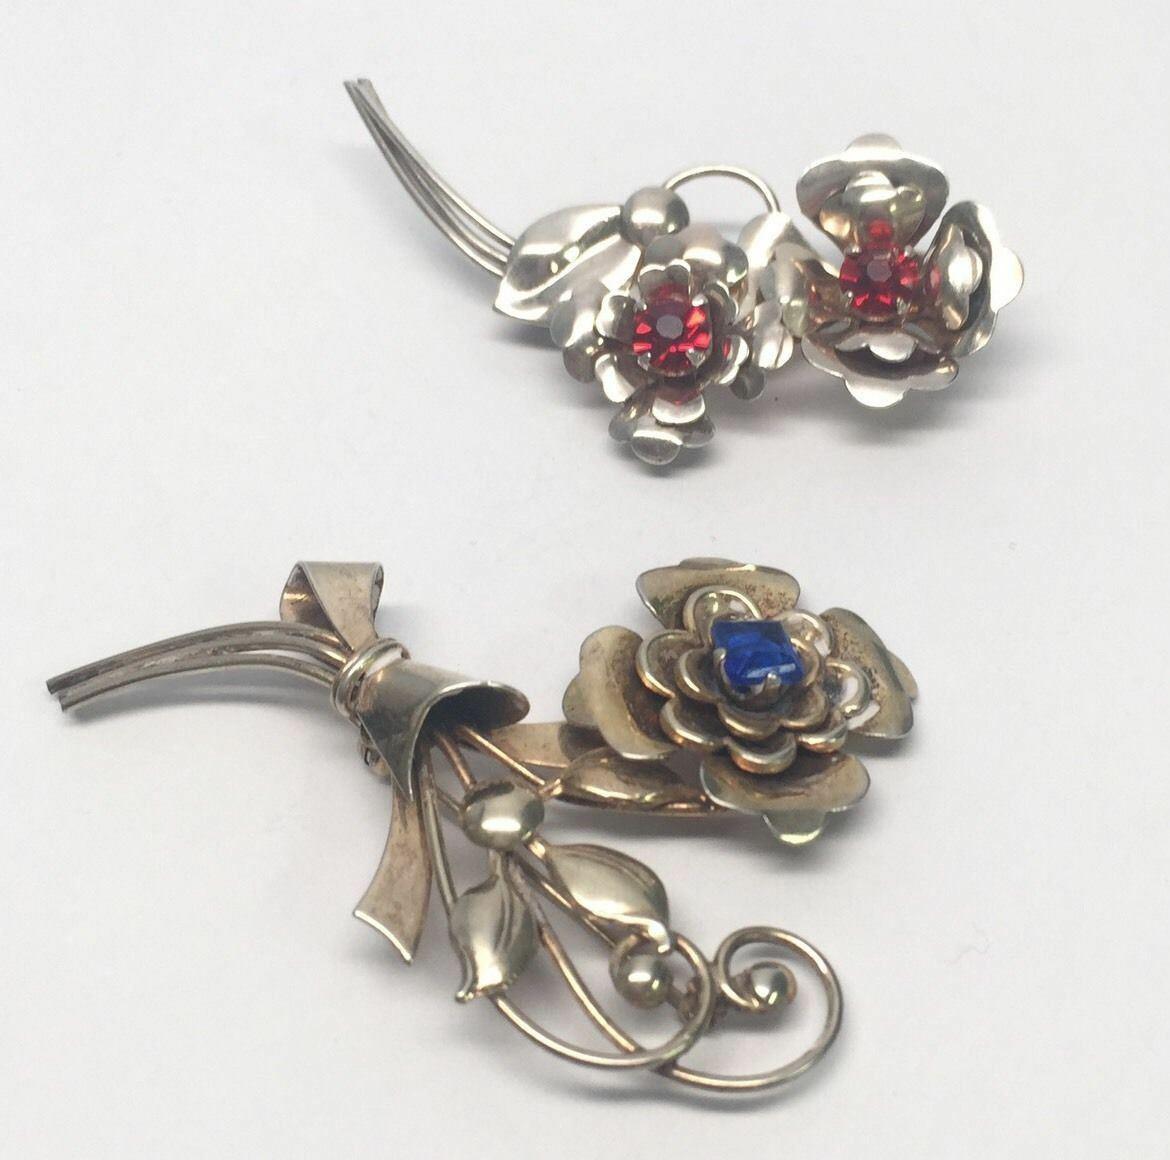 Harry Iskin 1940s Sterling Silver Pair of Flower Brooches / Pins 4